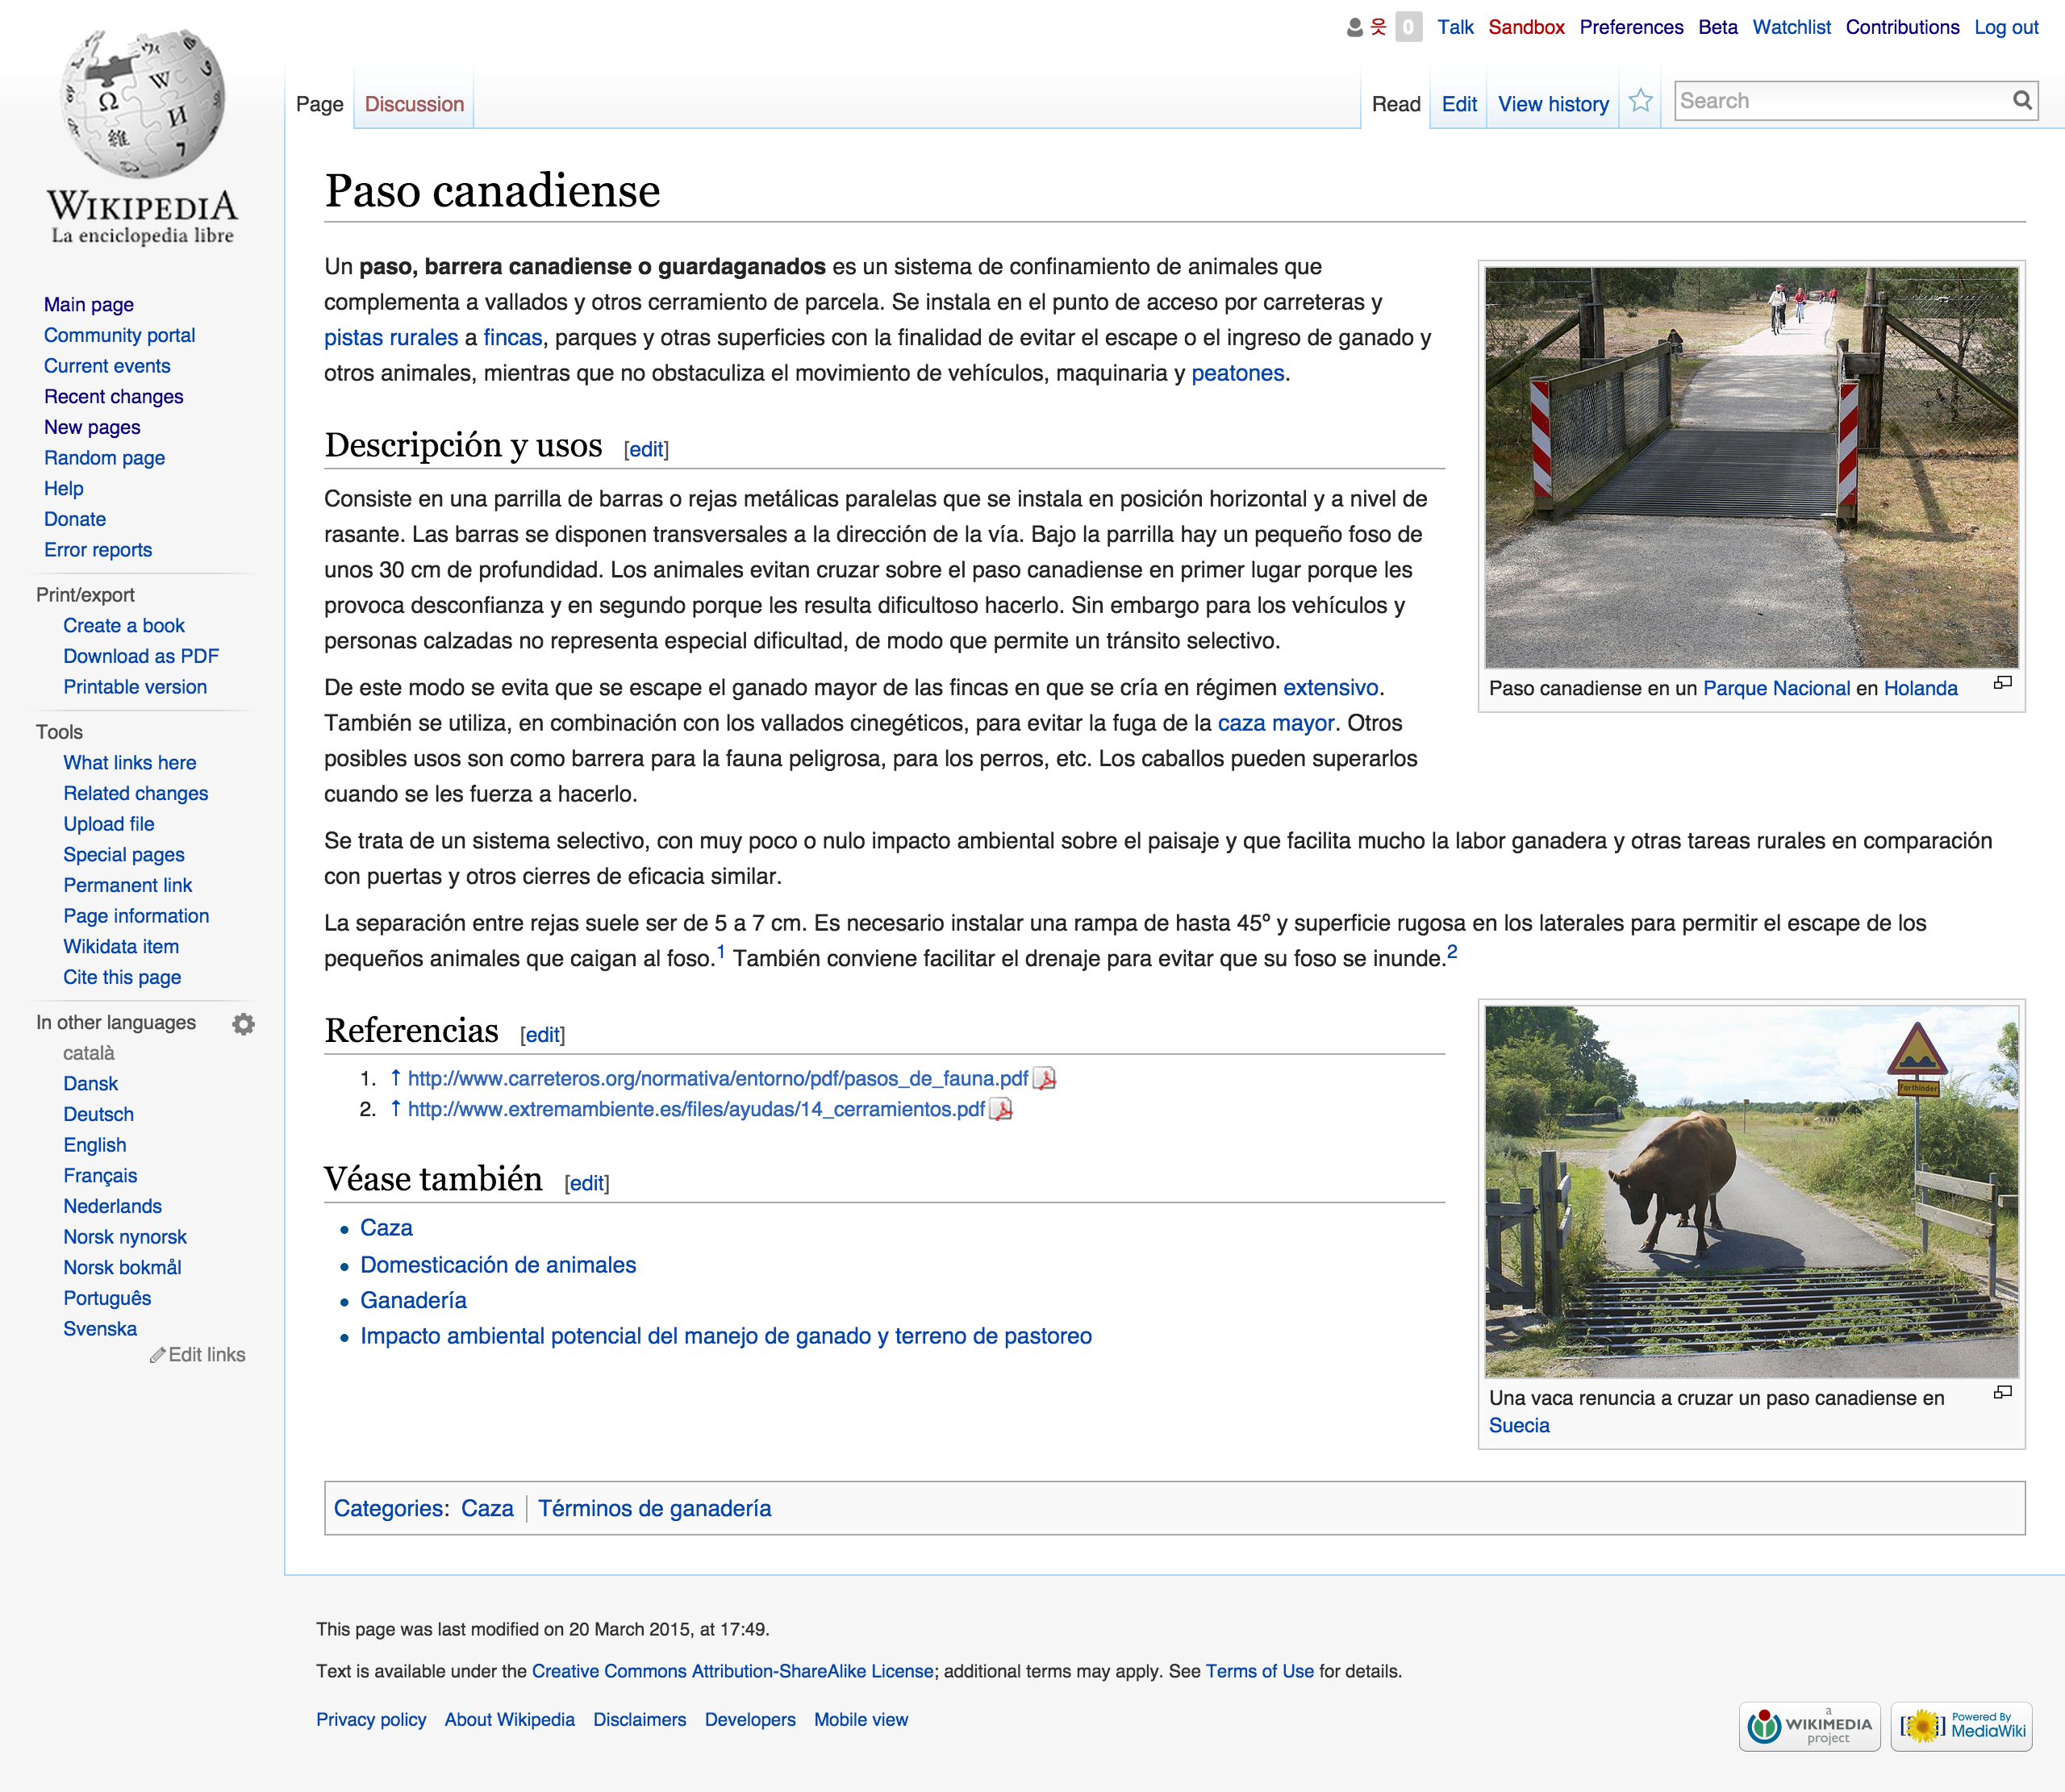 screencapture-es-wikipedia-org-wiki-Paso_canadiense-1429577488598.png (2×2 px, 2 MB)